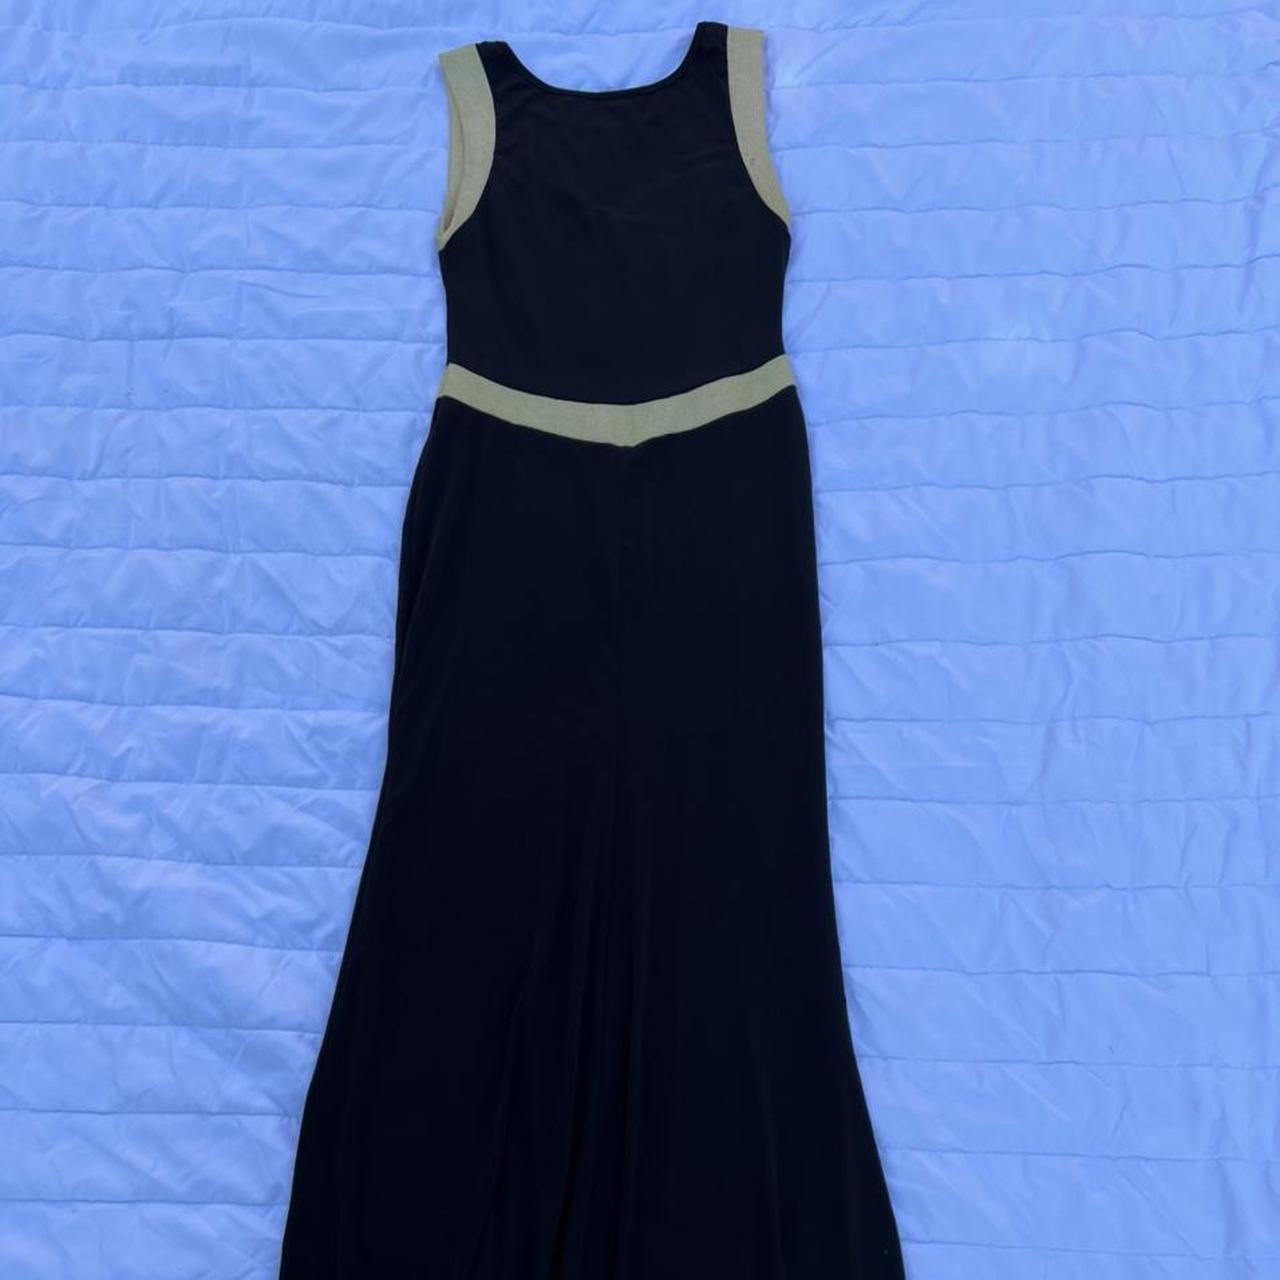 Product Image 3 - Really pretty long dress for